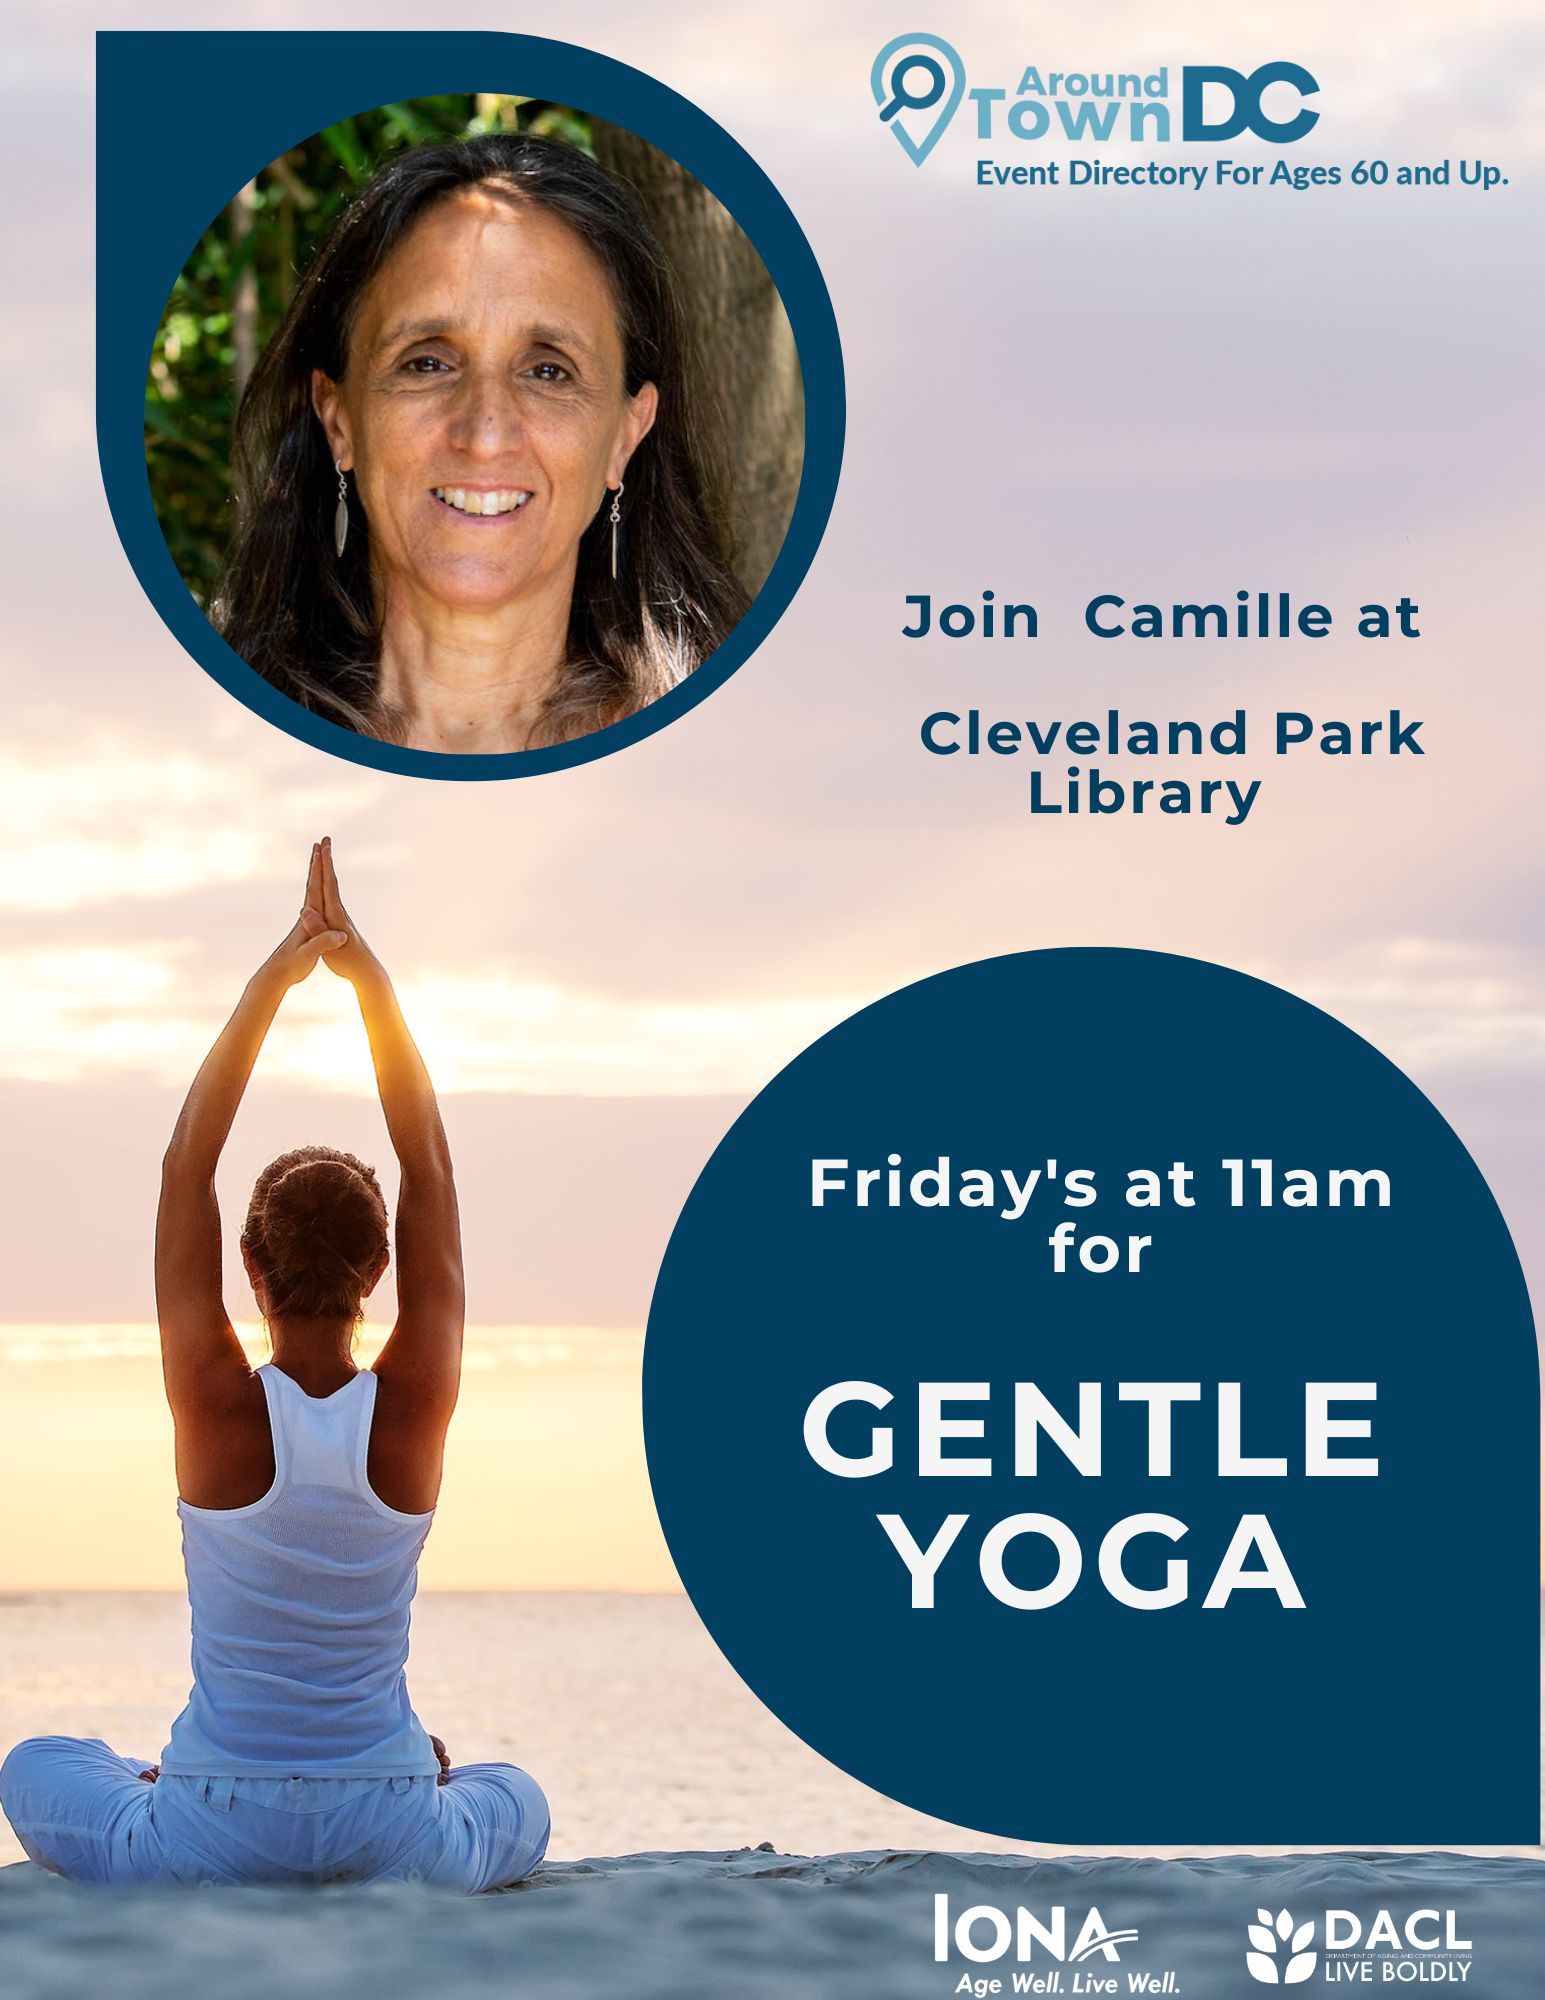 Gentle Yoga with Camille on Fridays at 11:00 am - Around Town DC